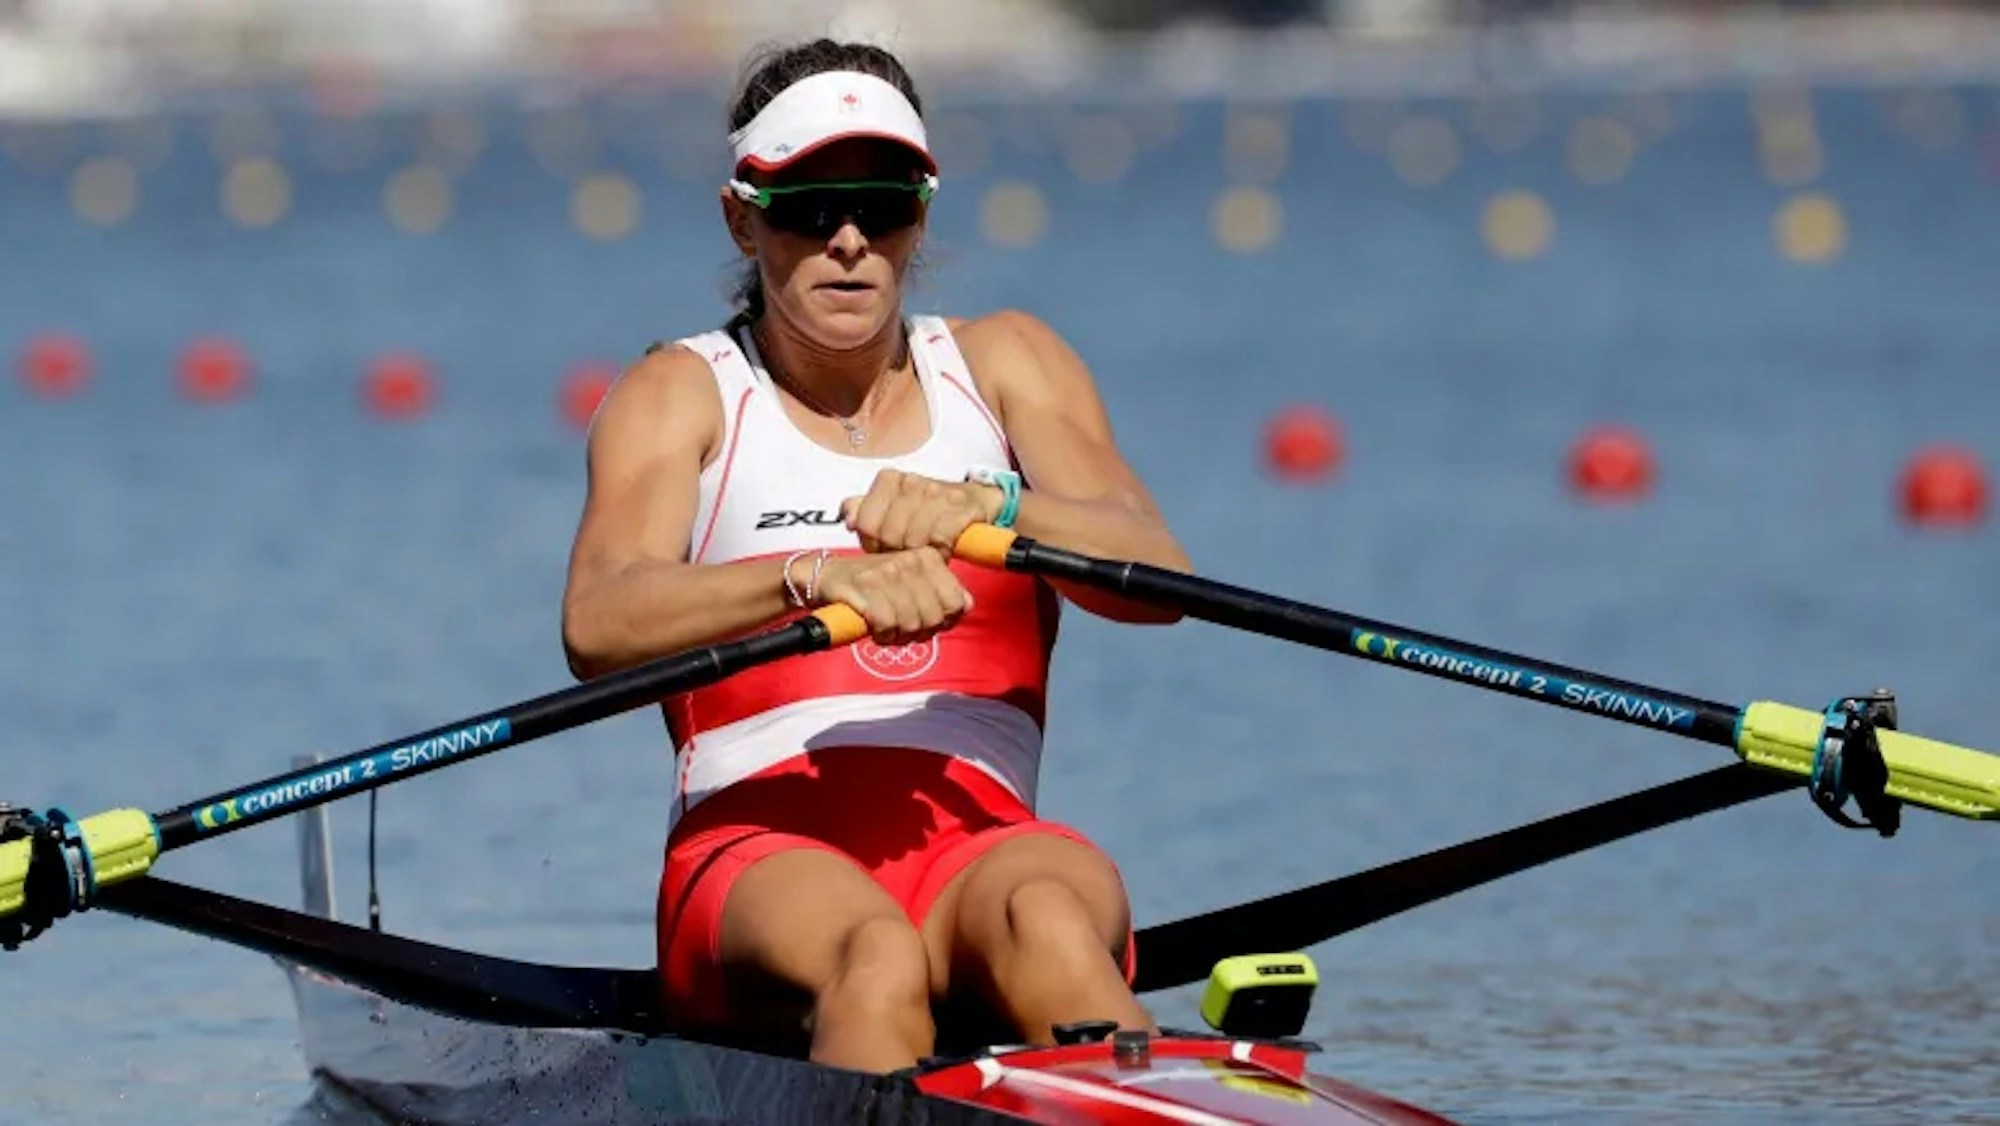 Andrea Proske rowing her boat in a competition